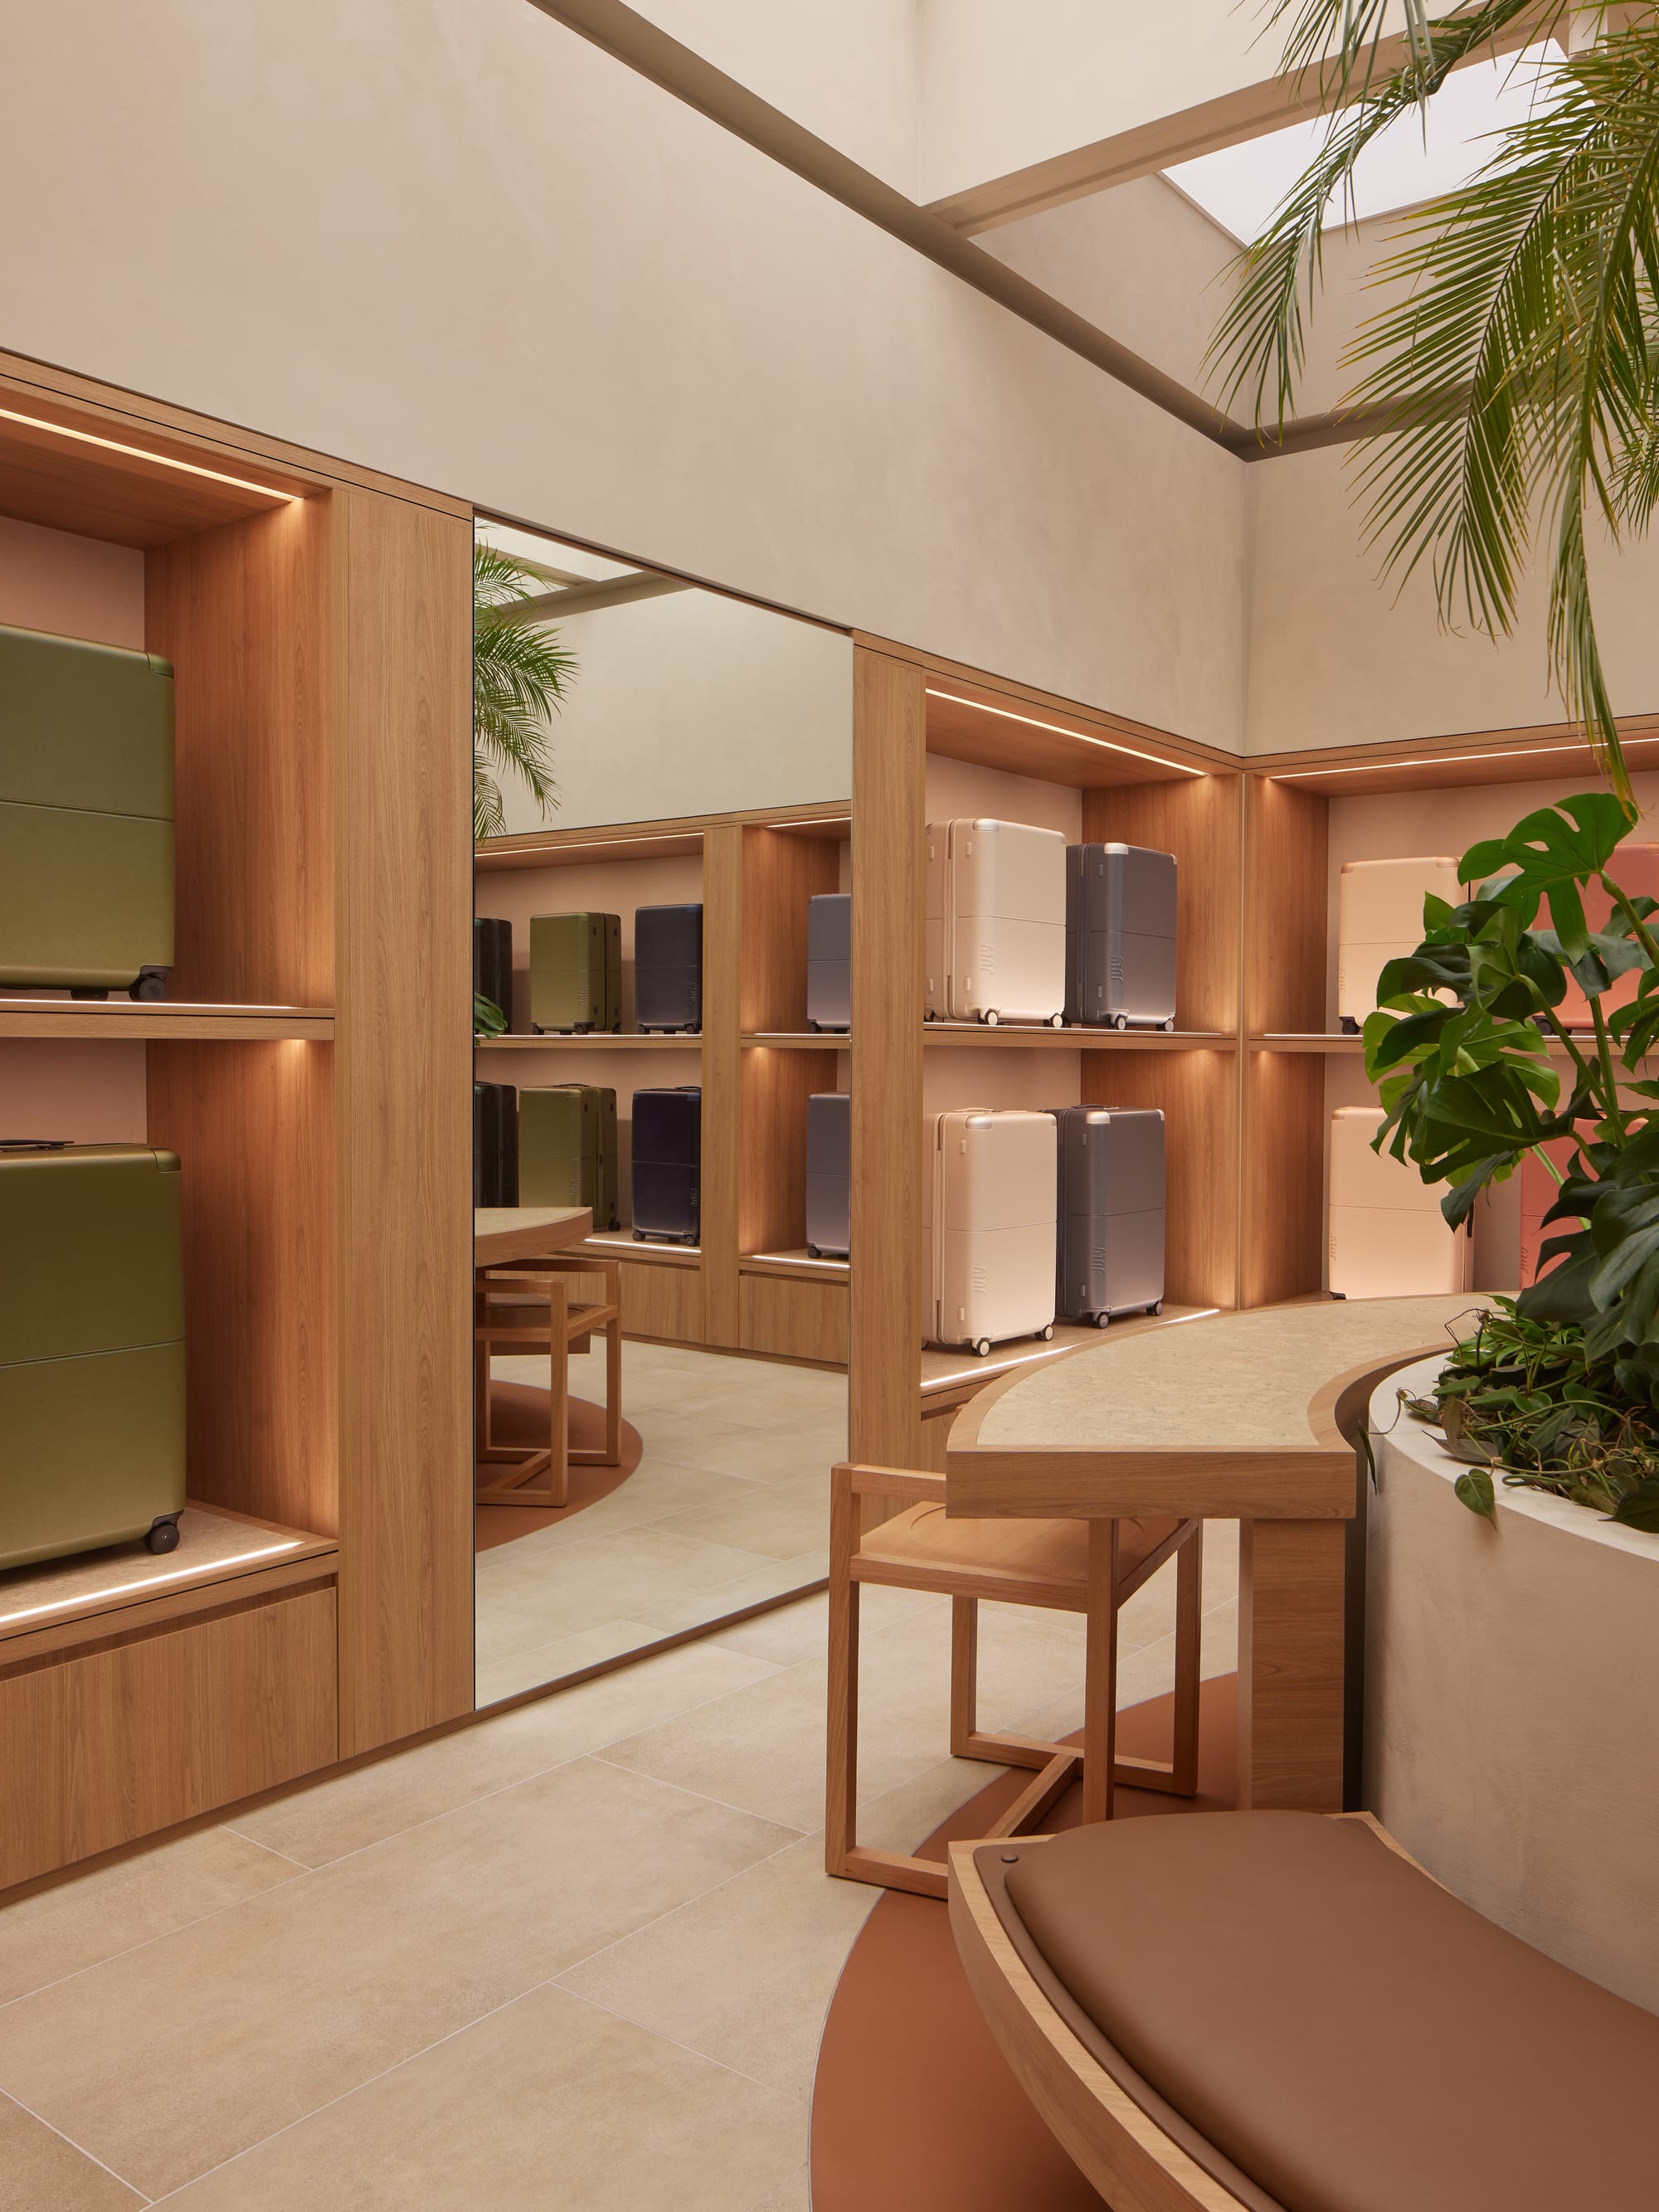 An interior shot of the July store in the Calile Hotel showing the timber, leather and stone materials